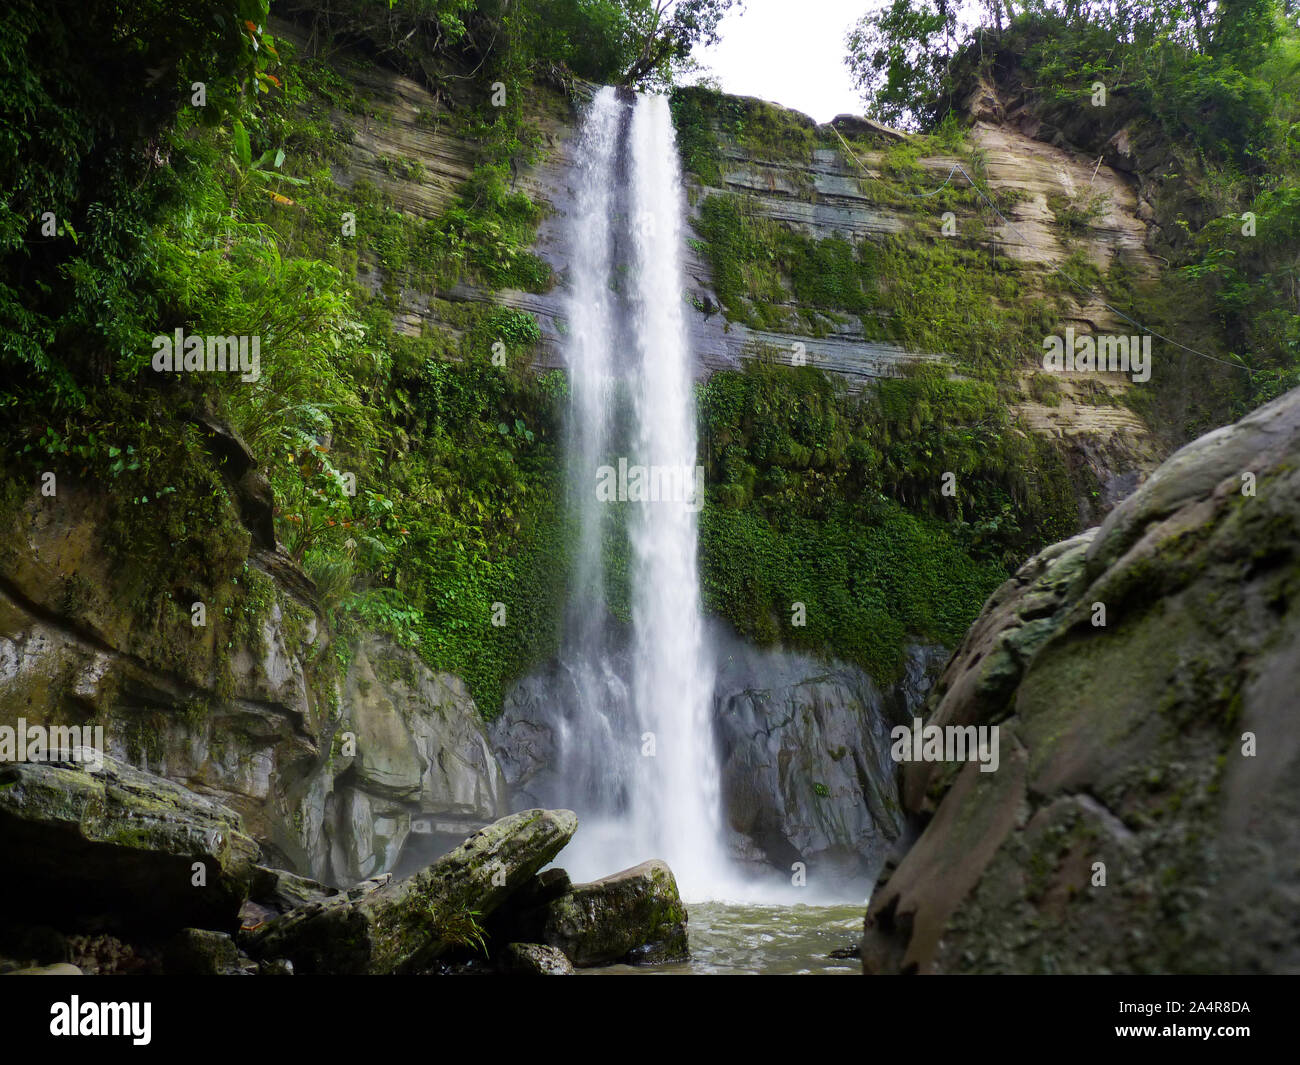 The Madhabkunda waterfall is one of the most attractive tourist attractions in Sylhet, Bangladesh. May 10, 2010. Stock Photo